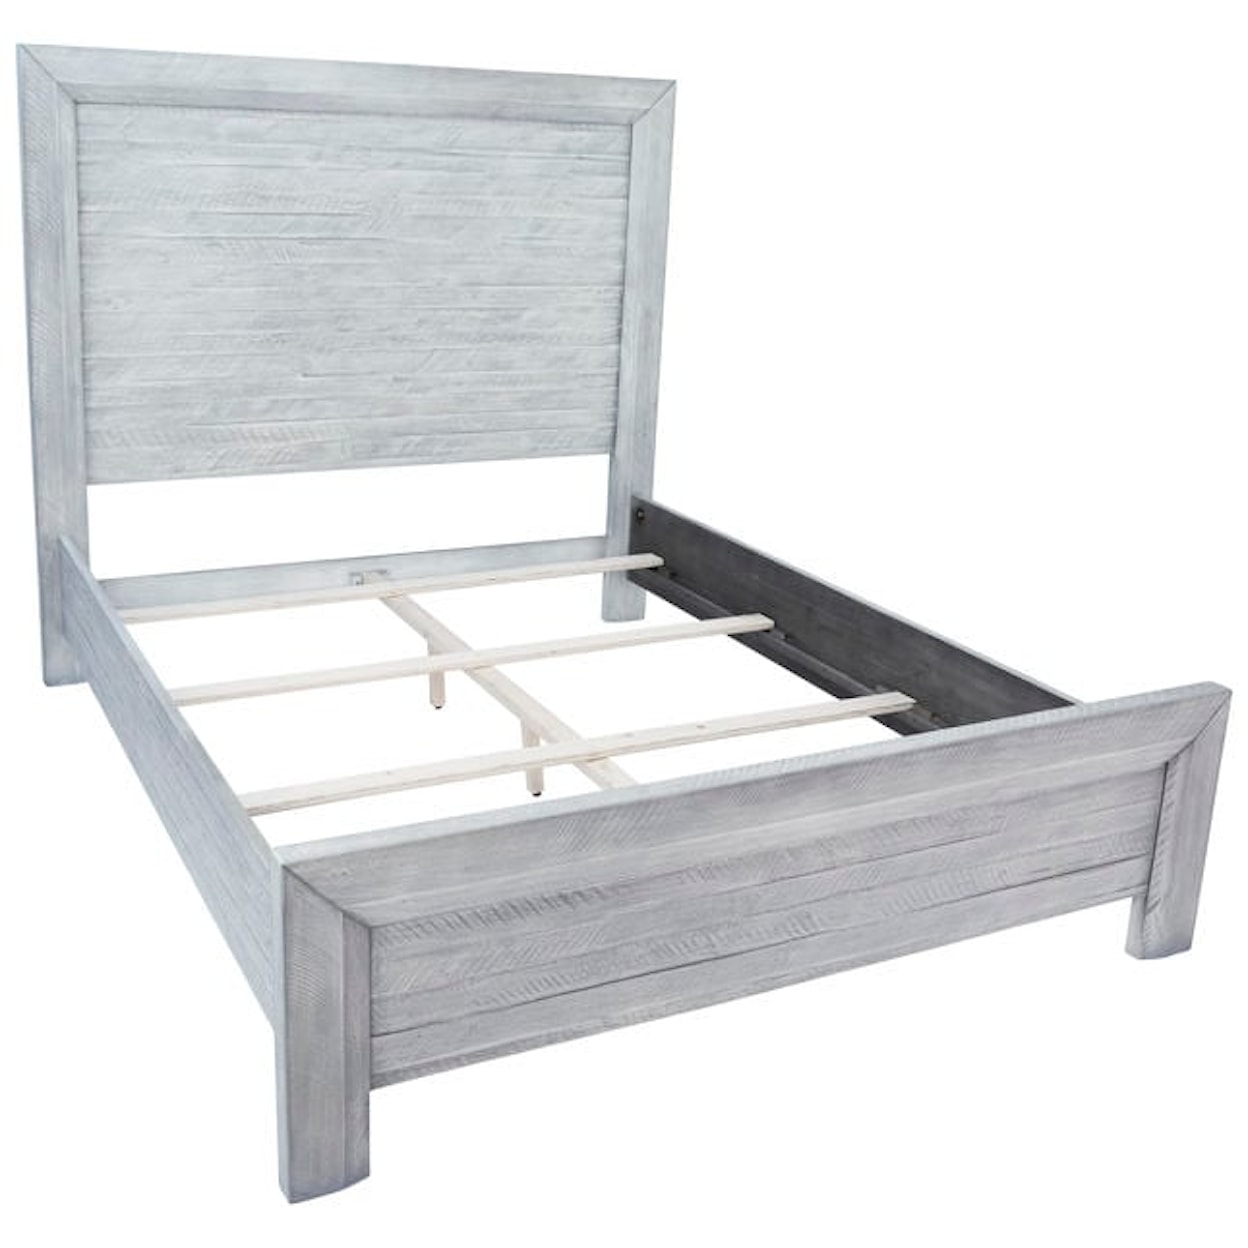 Dovetail Furniture Clancy Clancy Queen Bed